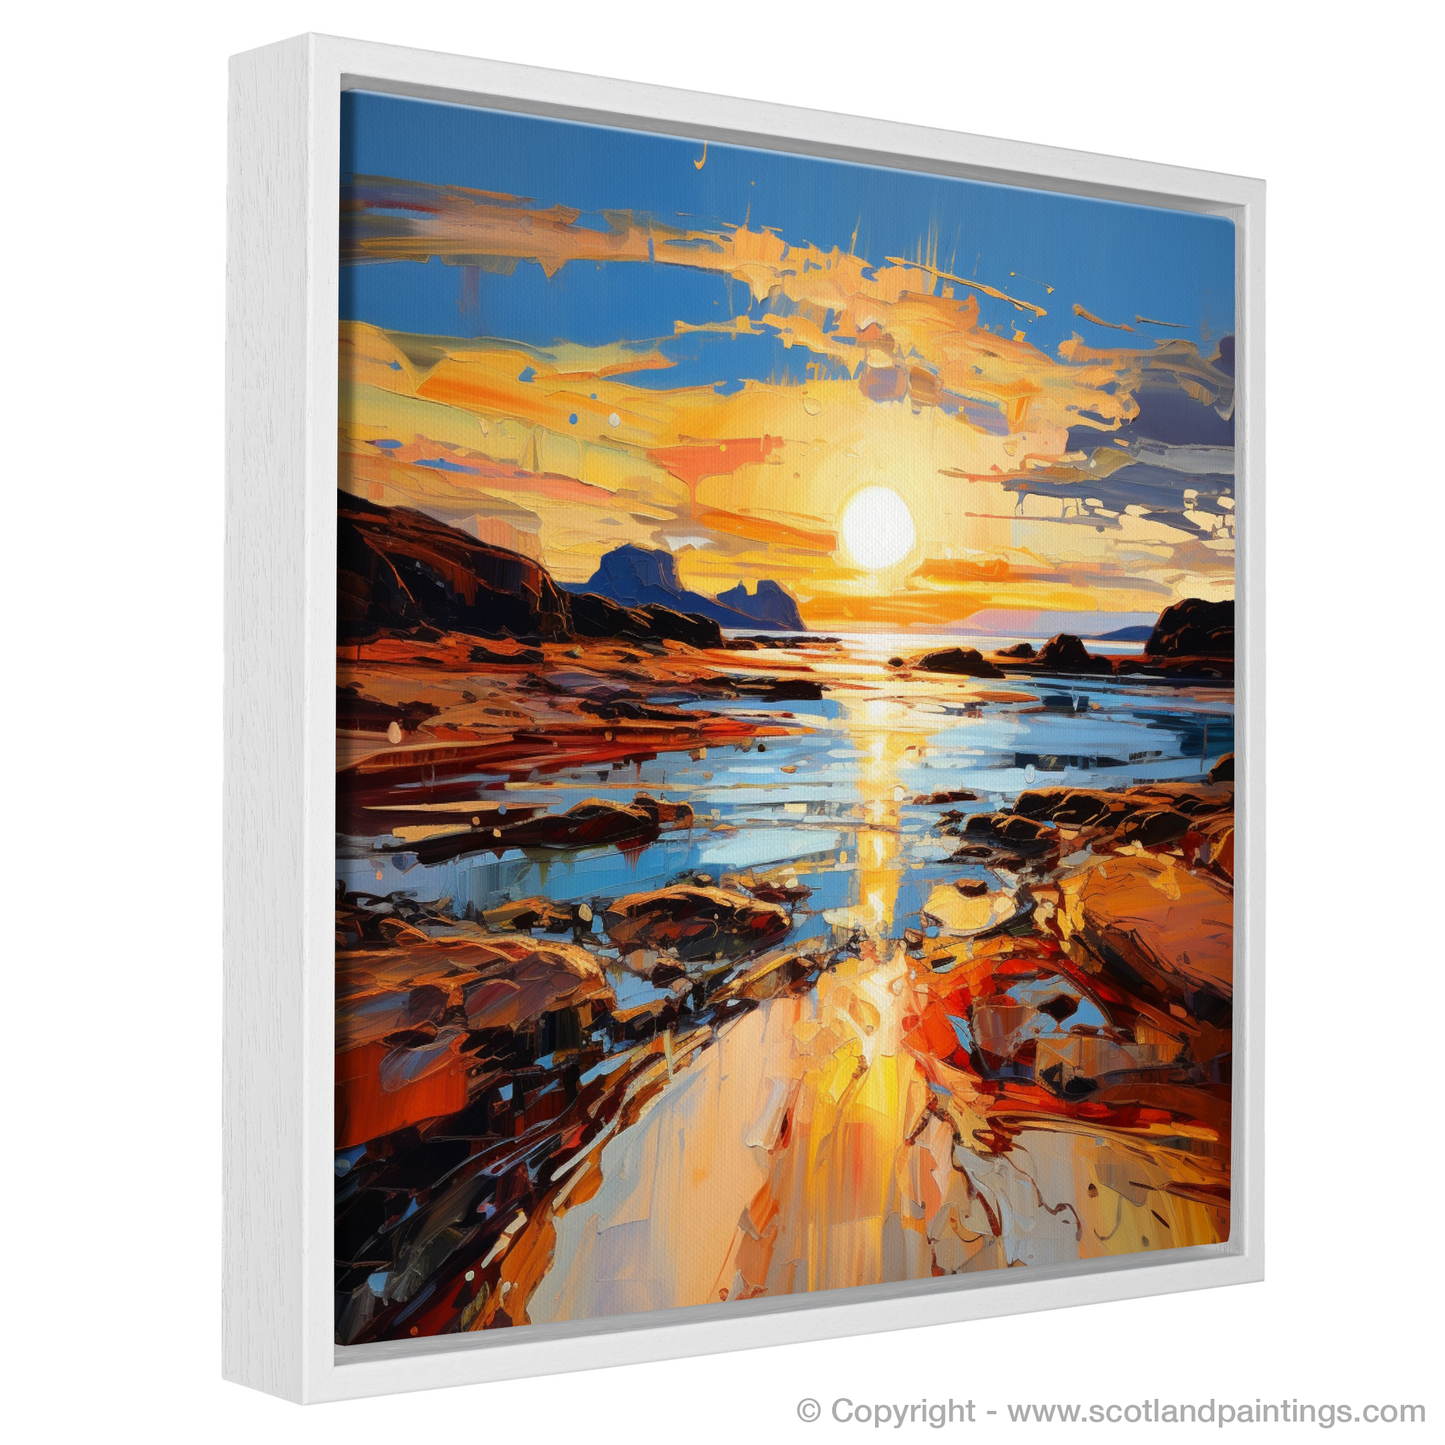 Painting and Art Print of Sound of Iona at golden hour entitled "Golden Hour Symphony: The Sound of Iona".